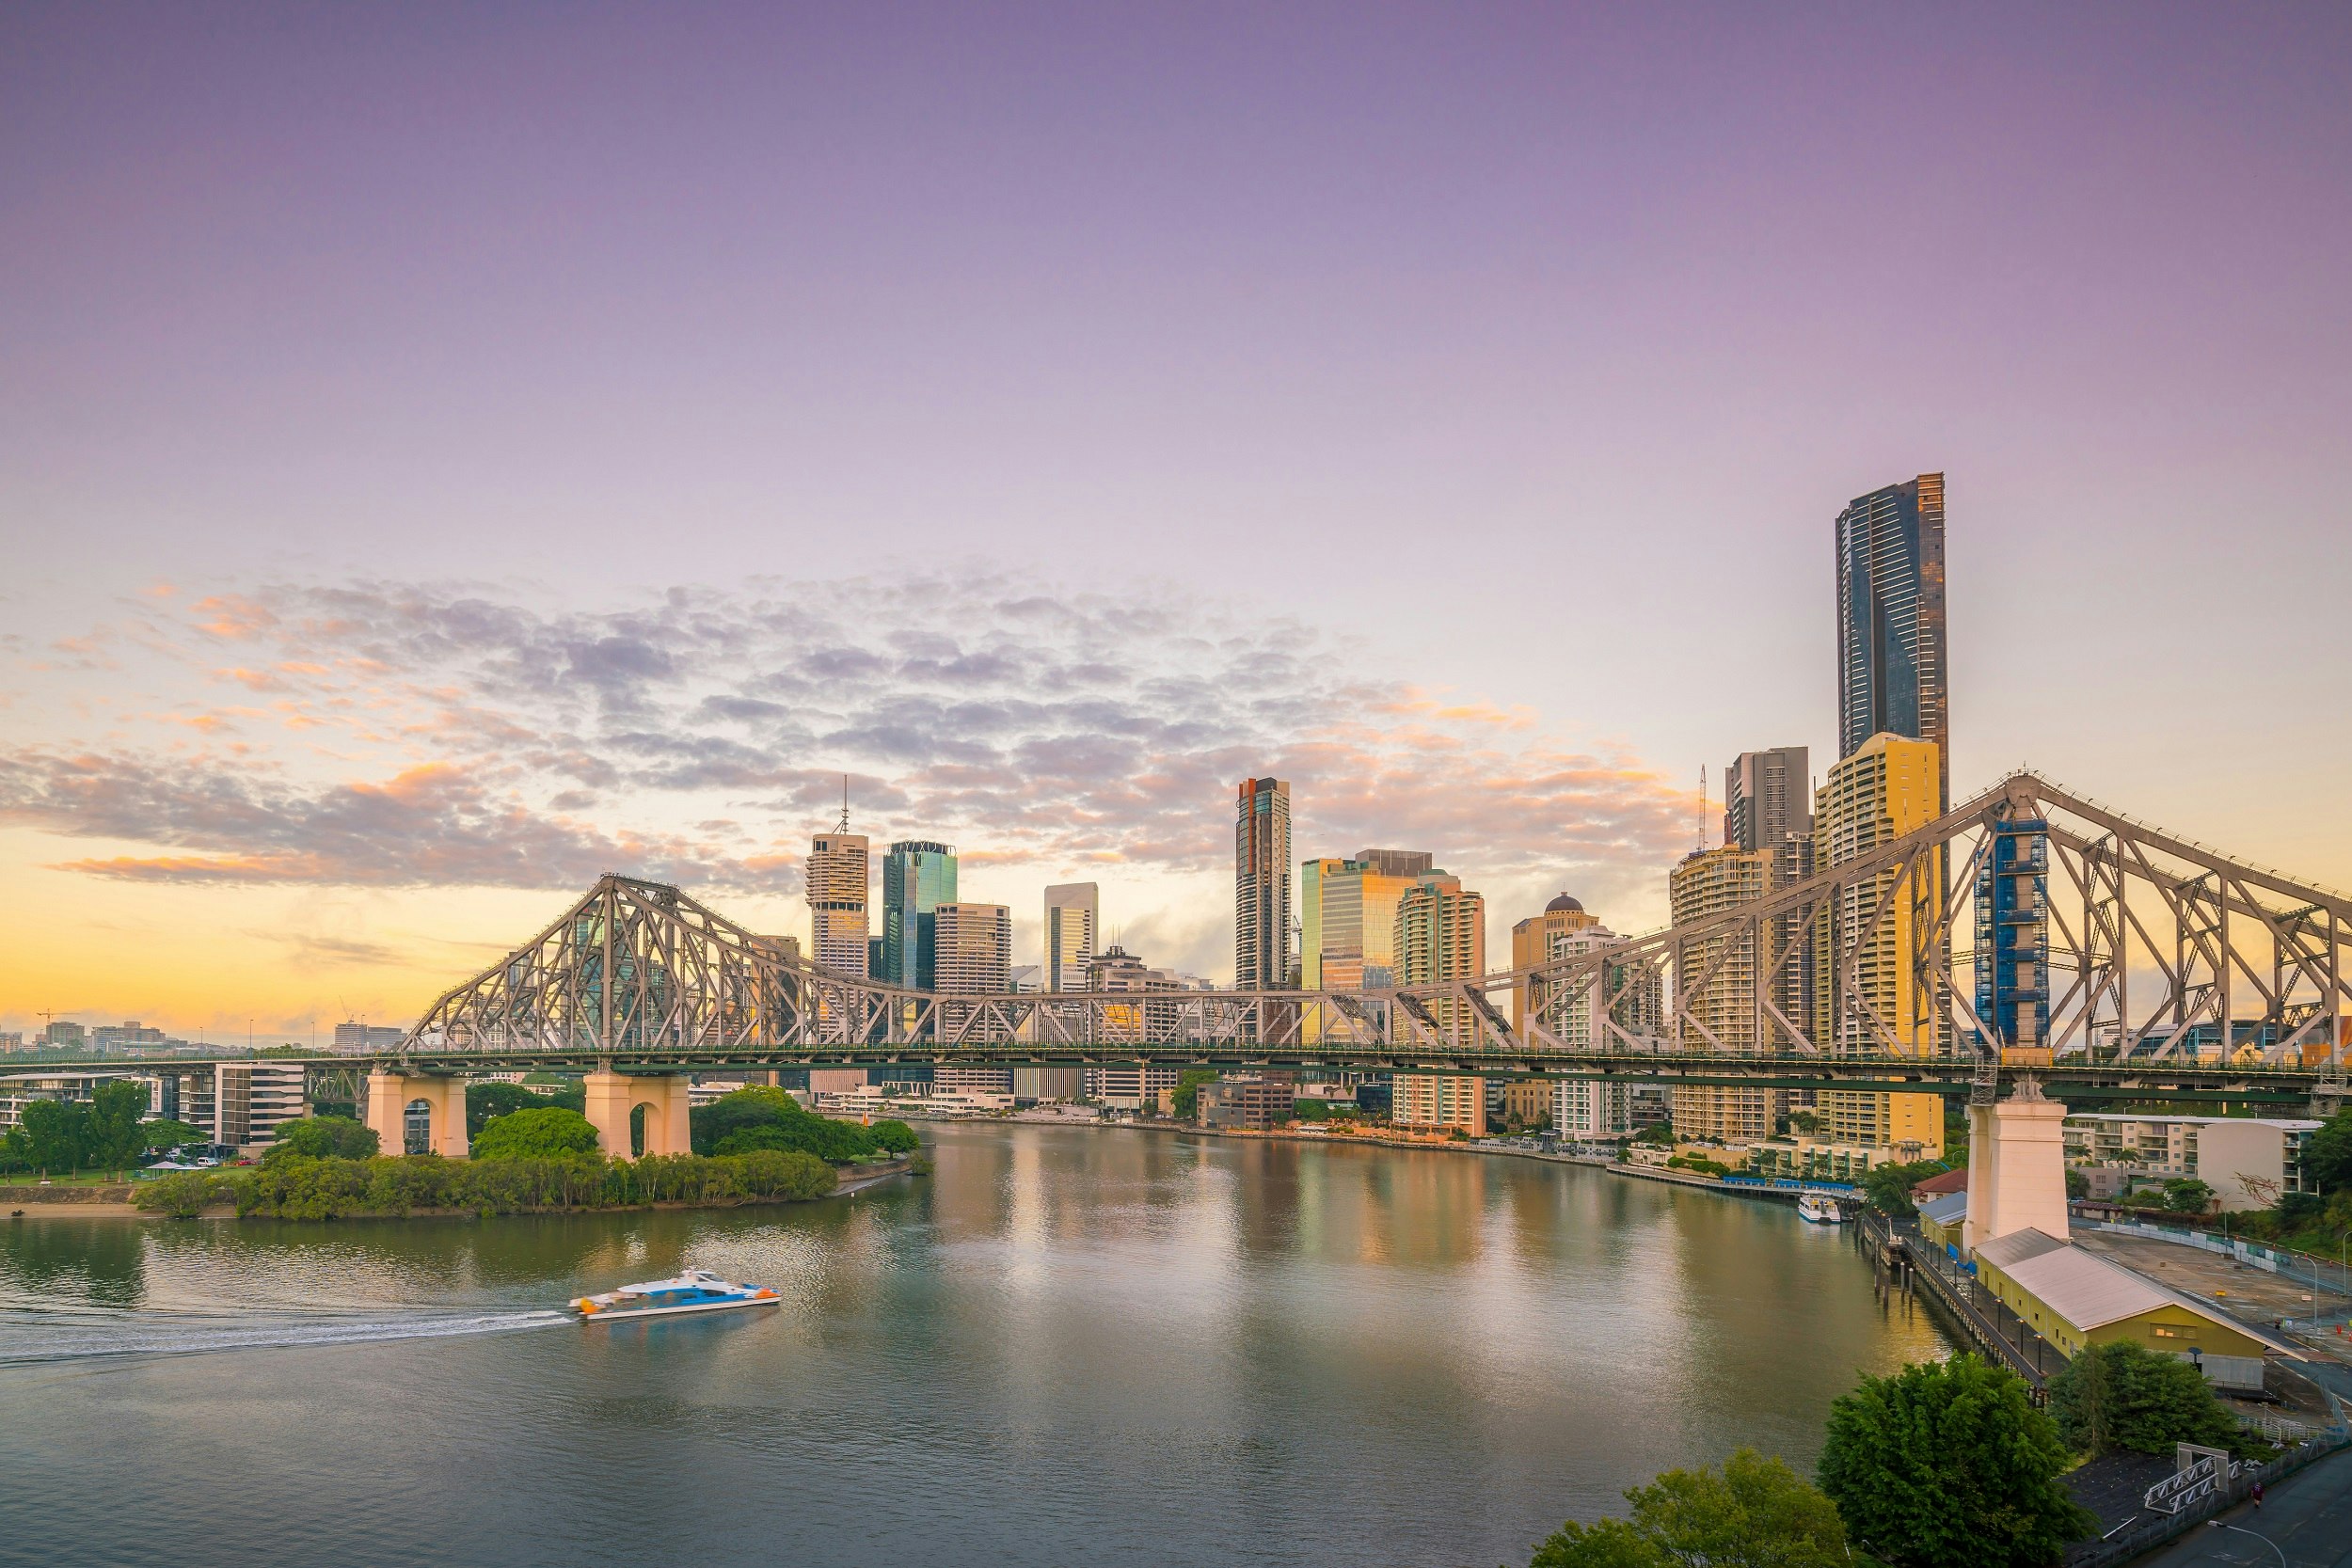 A skyline shot of Brisbane at sunset with a purple sky; the scene looks over a river and large rail bridge, with the cityscape as a backdrop.